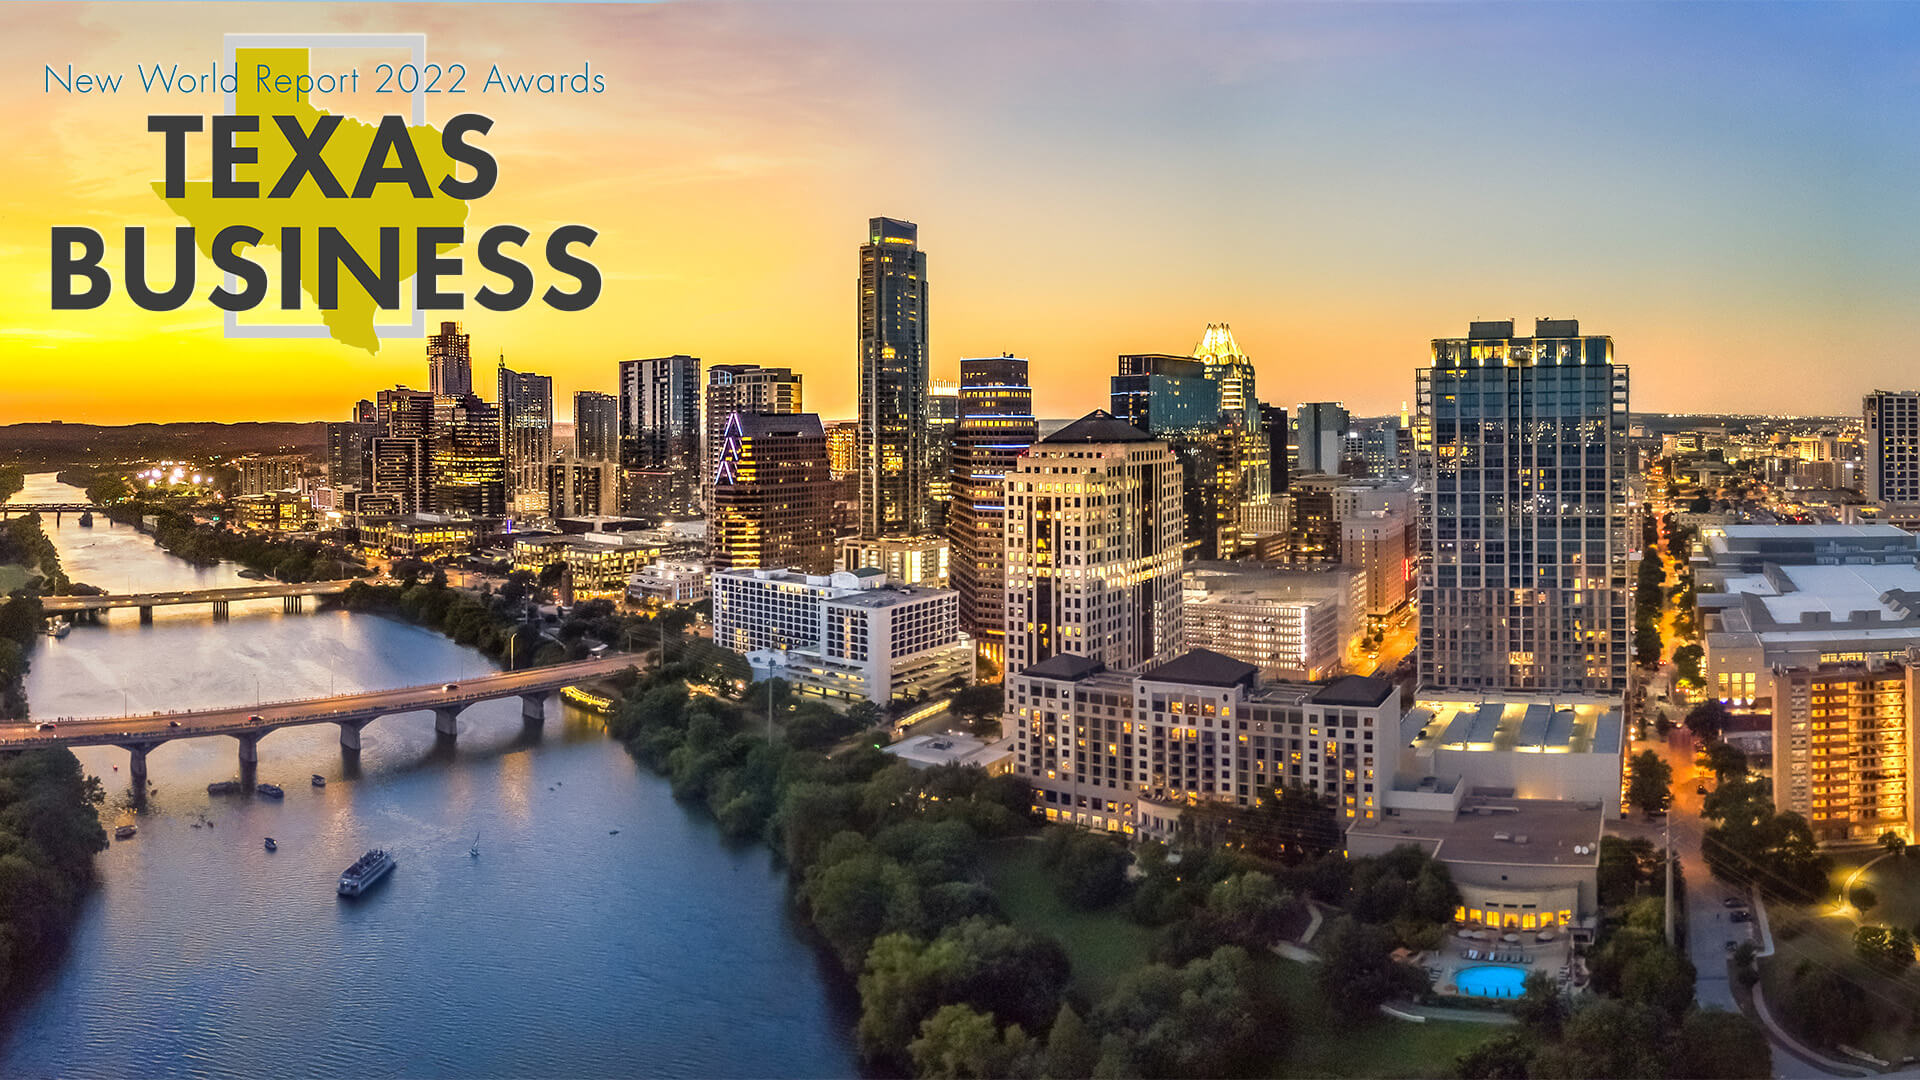 Austin city skyline at sunset. The New World Report Texas Business Awards 2022 logo is in the top left corner